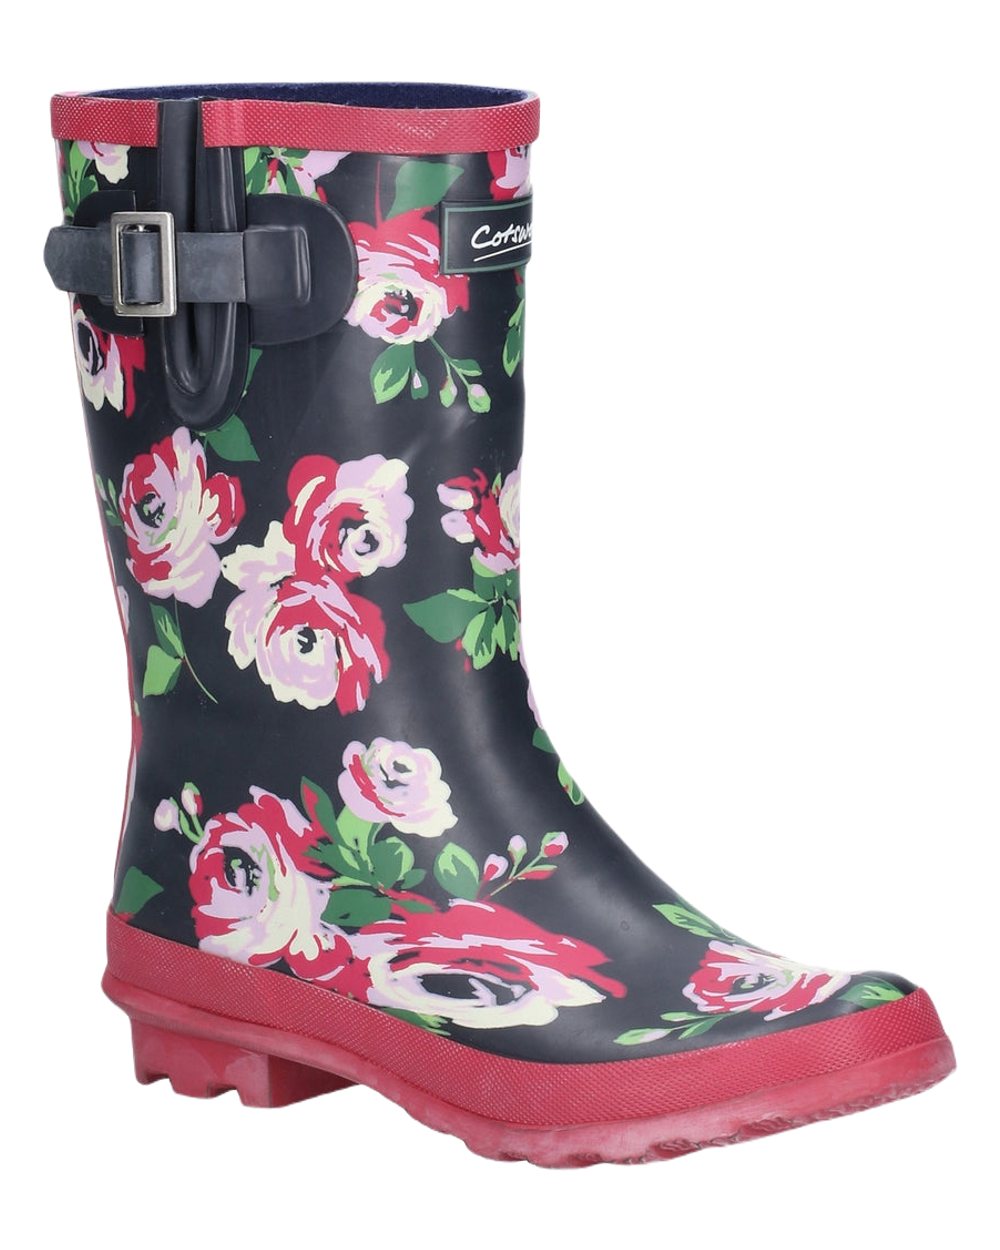 Cotswold Paxford Elasticated Mid Calf Wellington Boots In Black Flowers 